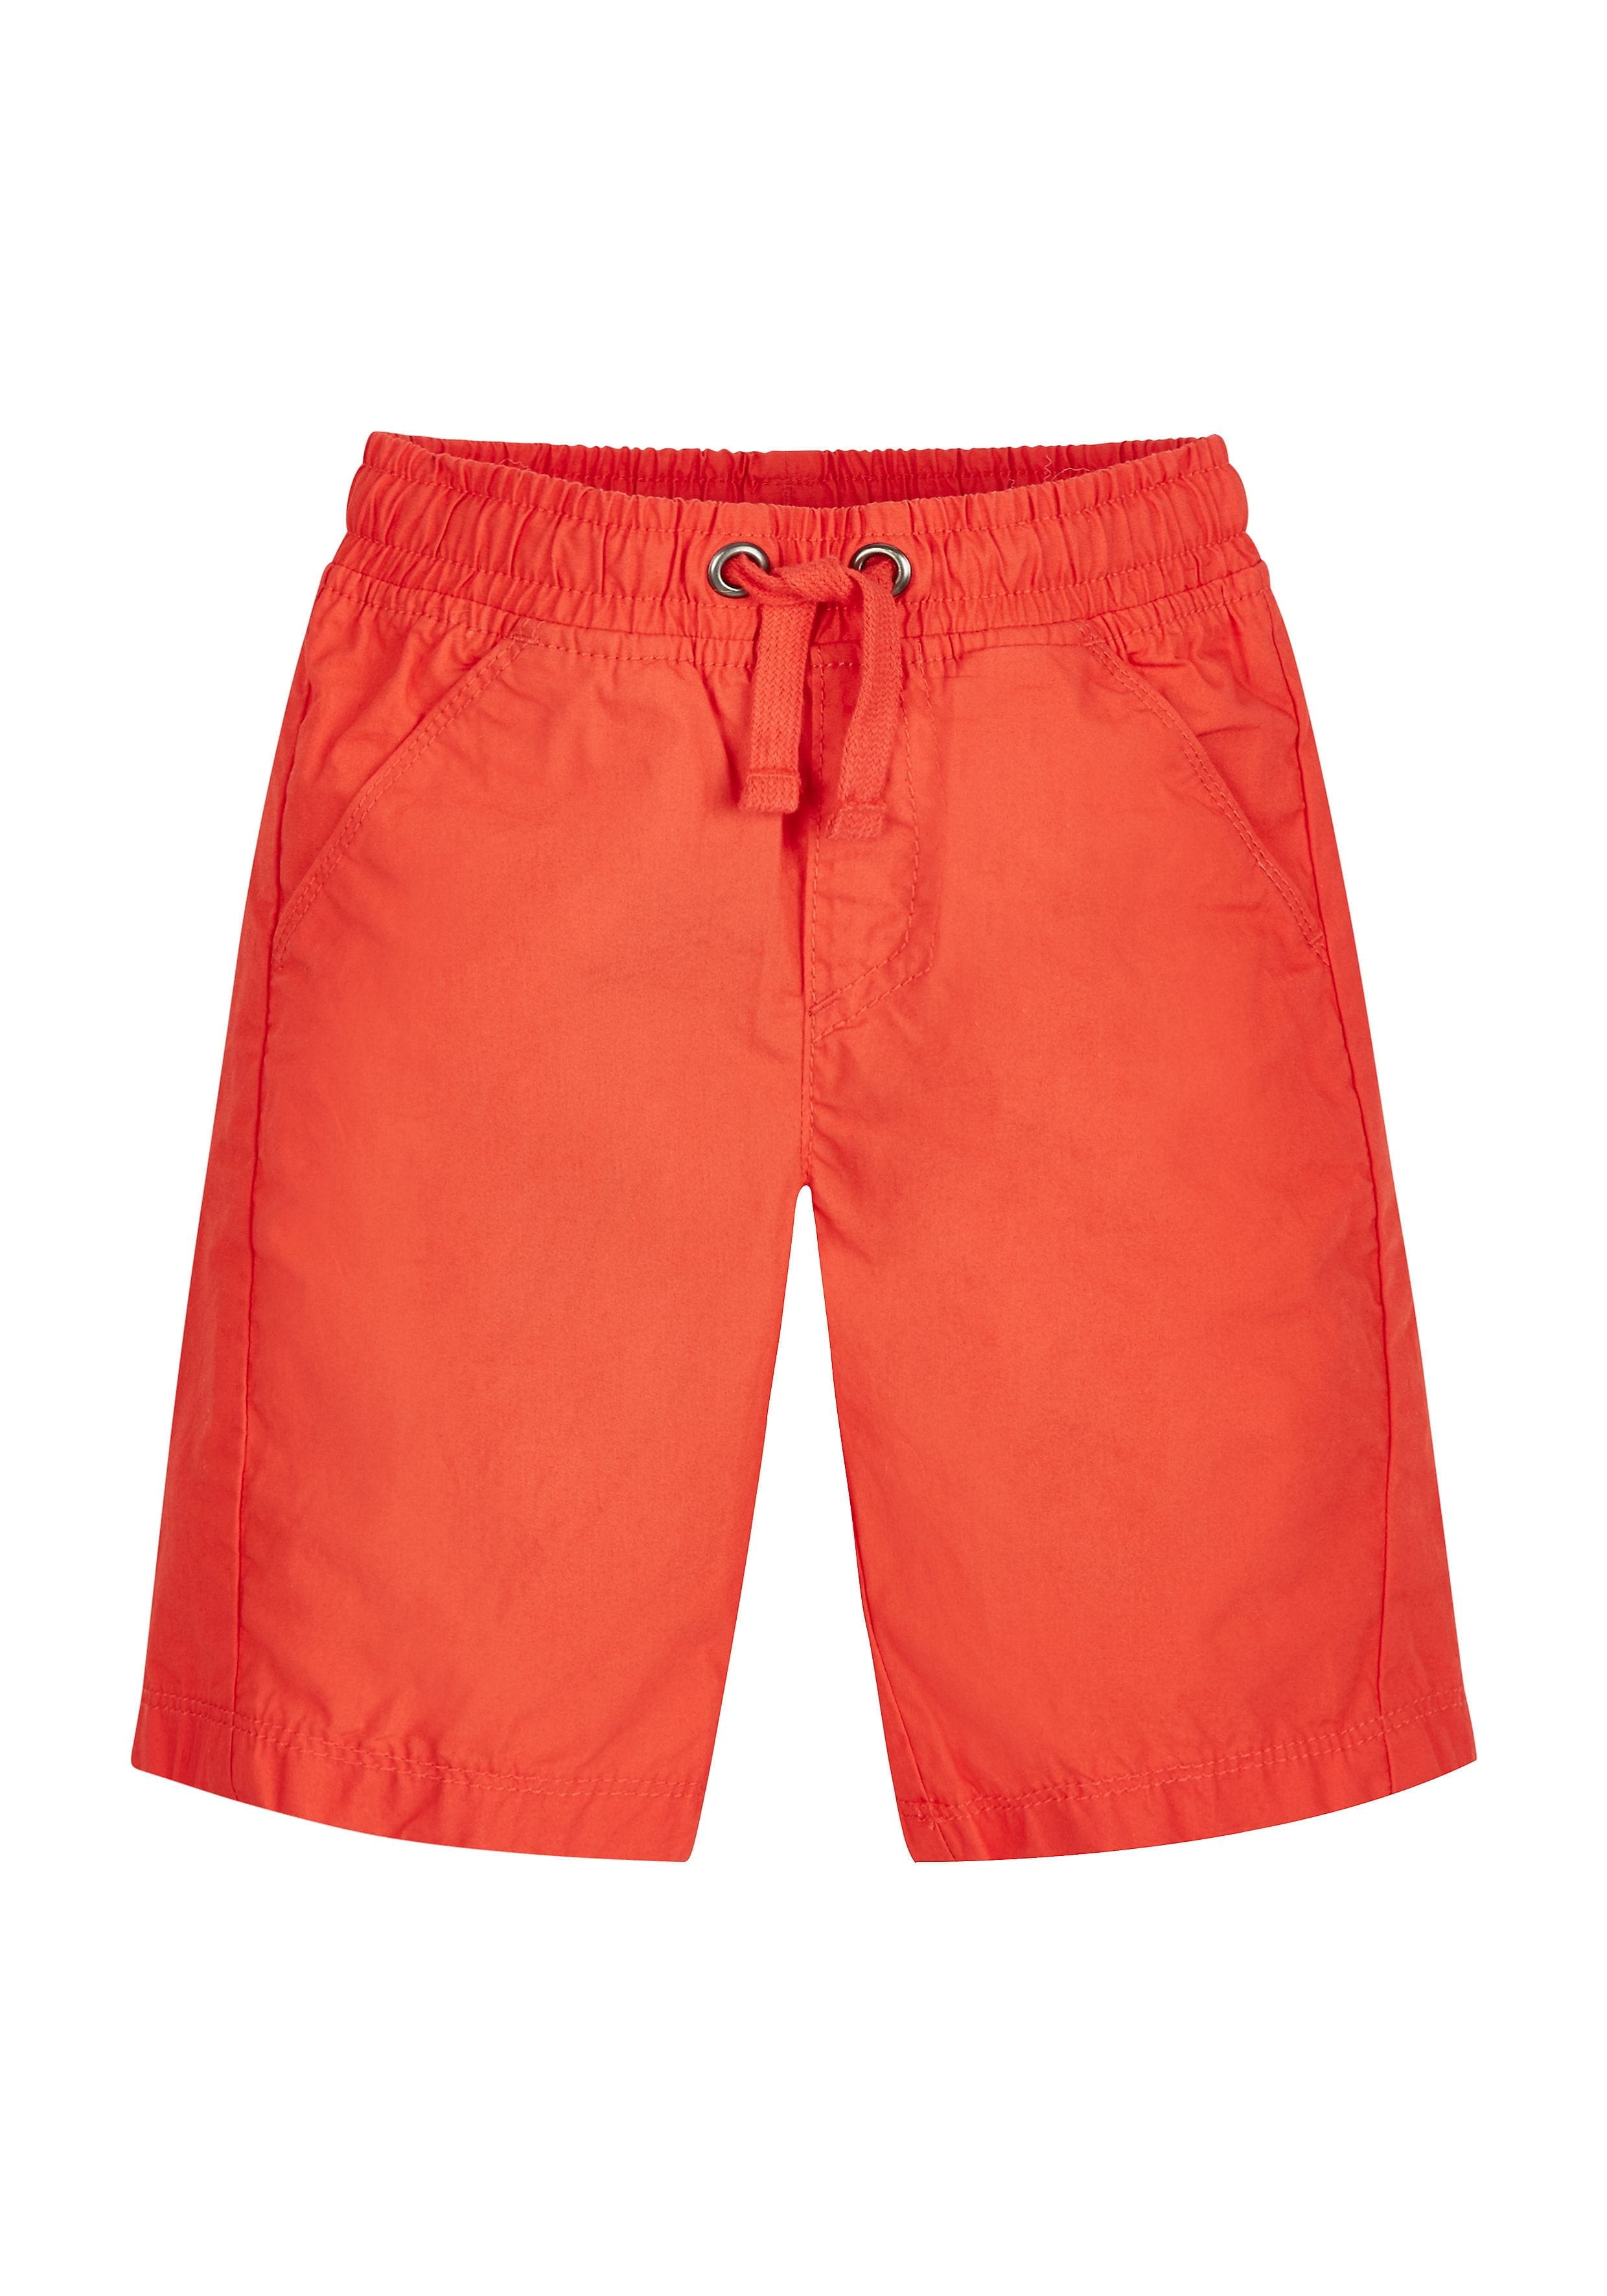 Mothercare | Boys Red Shorts - Red 0